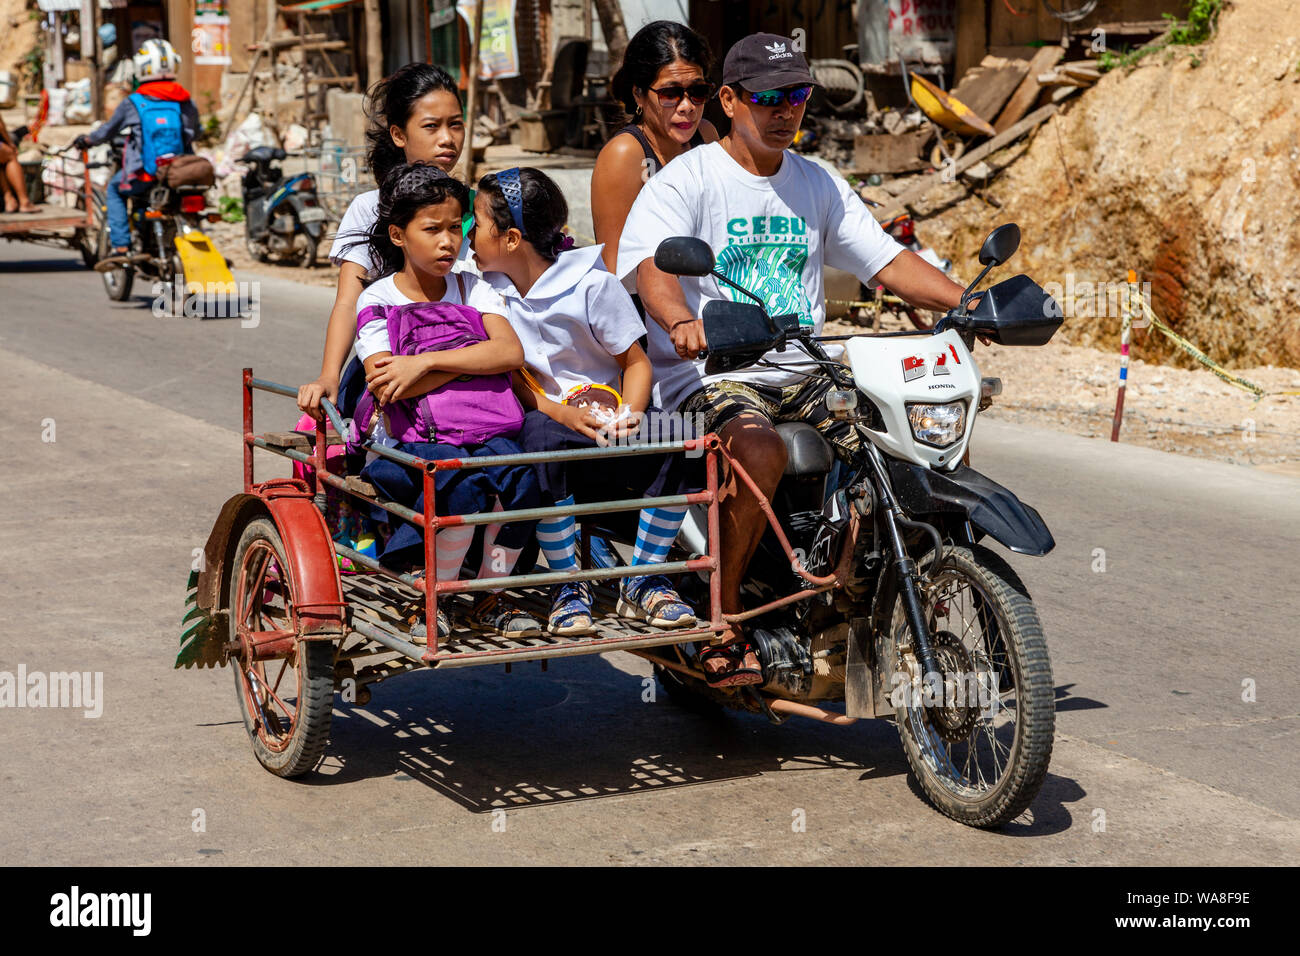 Filipino Schoolchildren Travelling To School By A Motorcycle Taxi, El Nido, Palawan Island, The Philippines Stock Photo